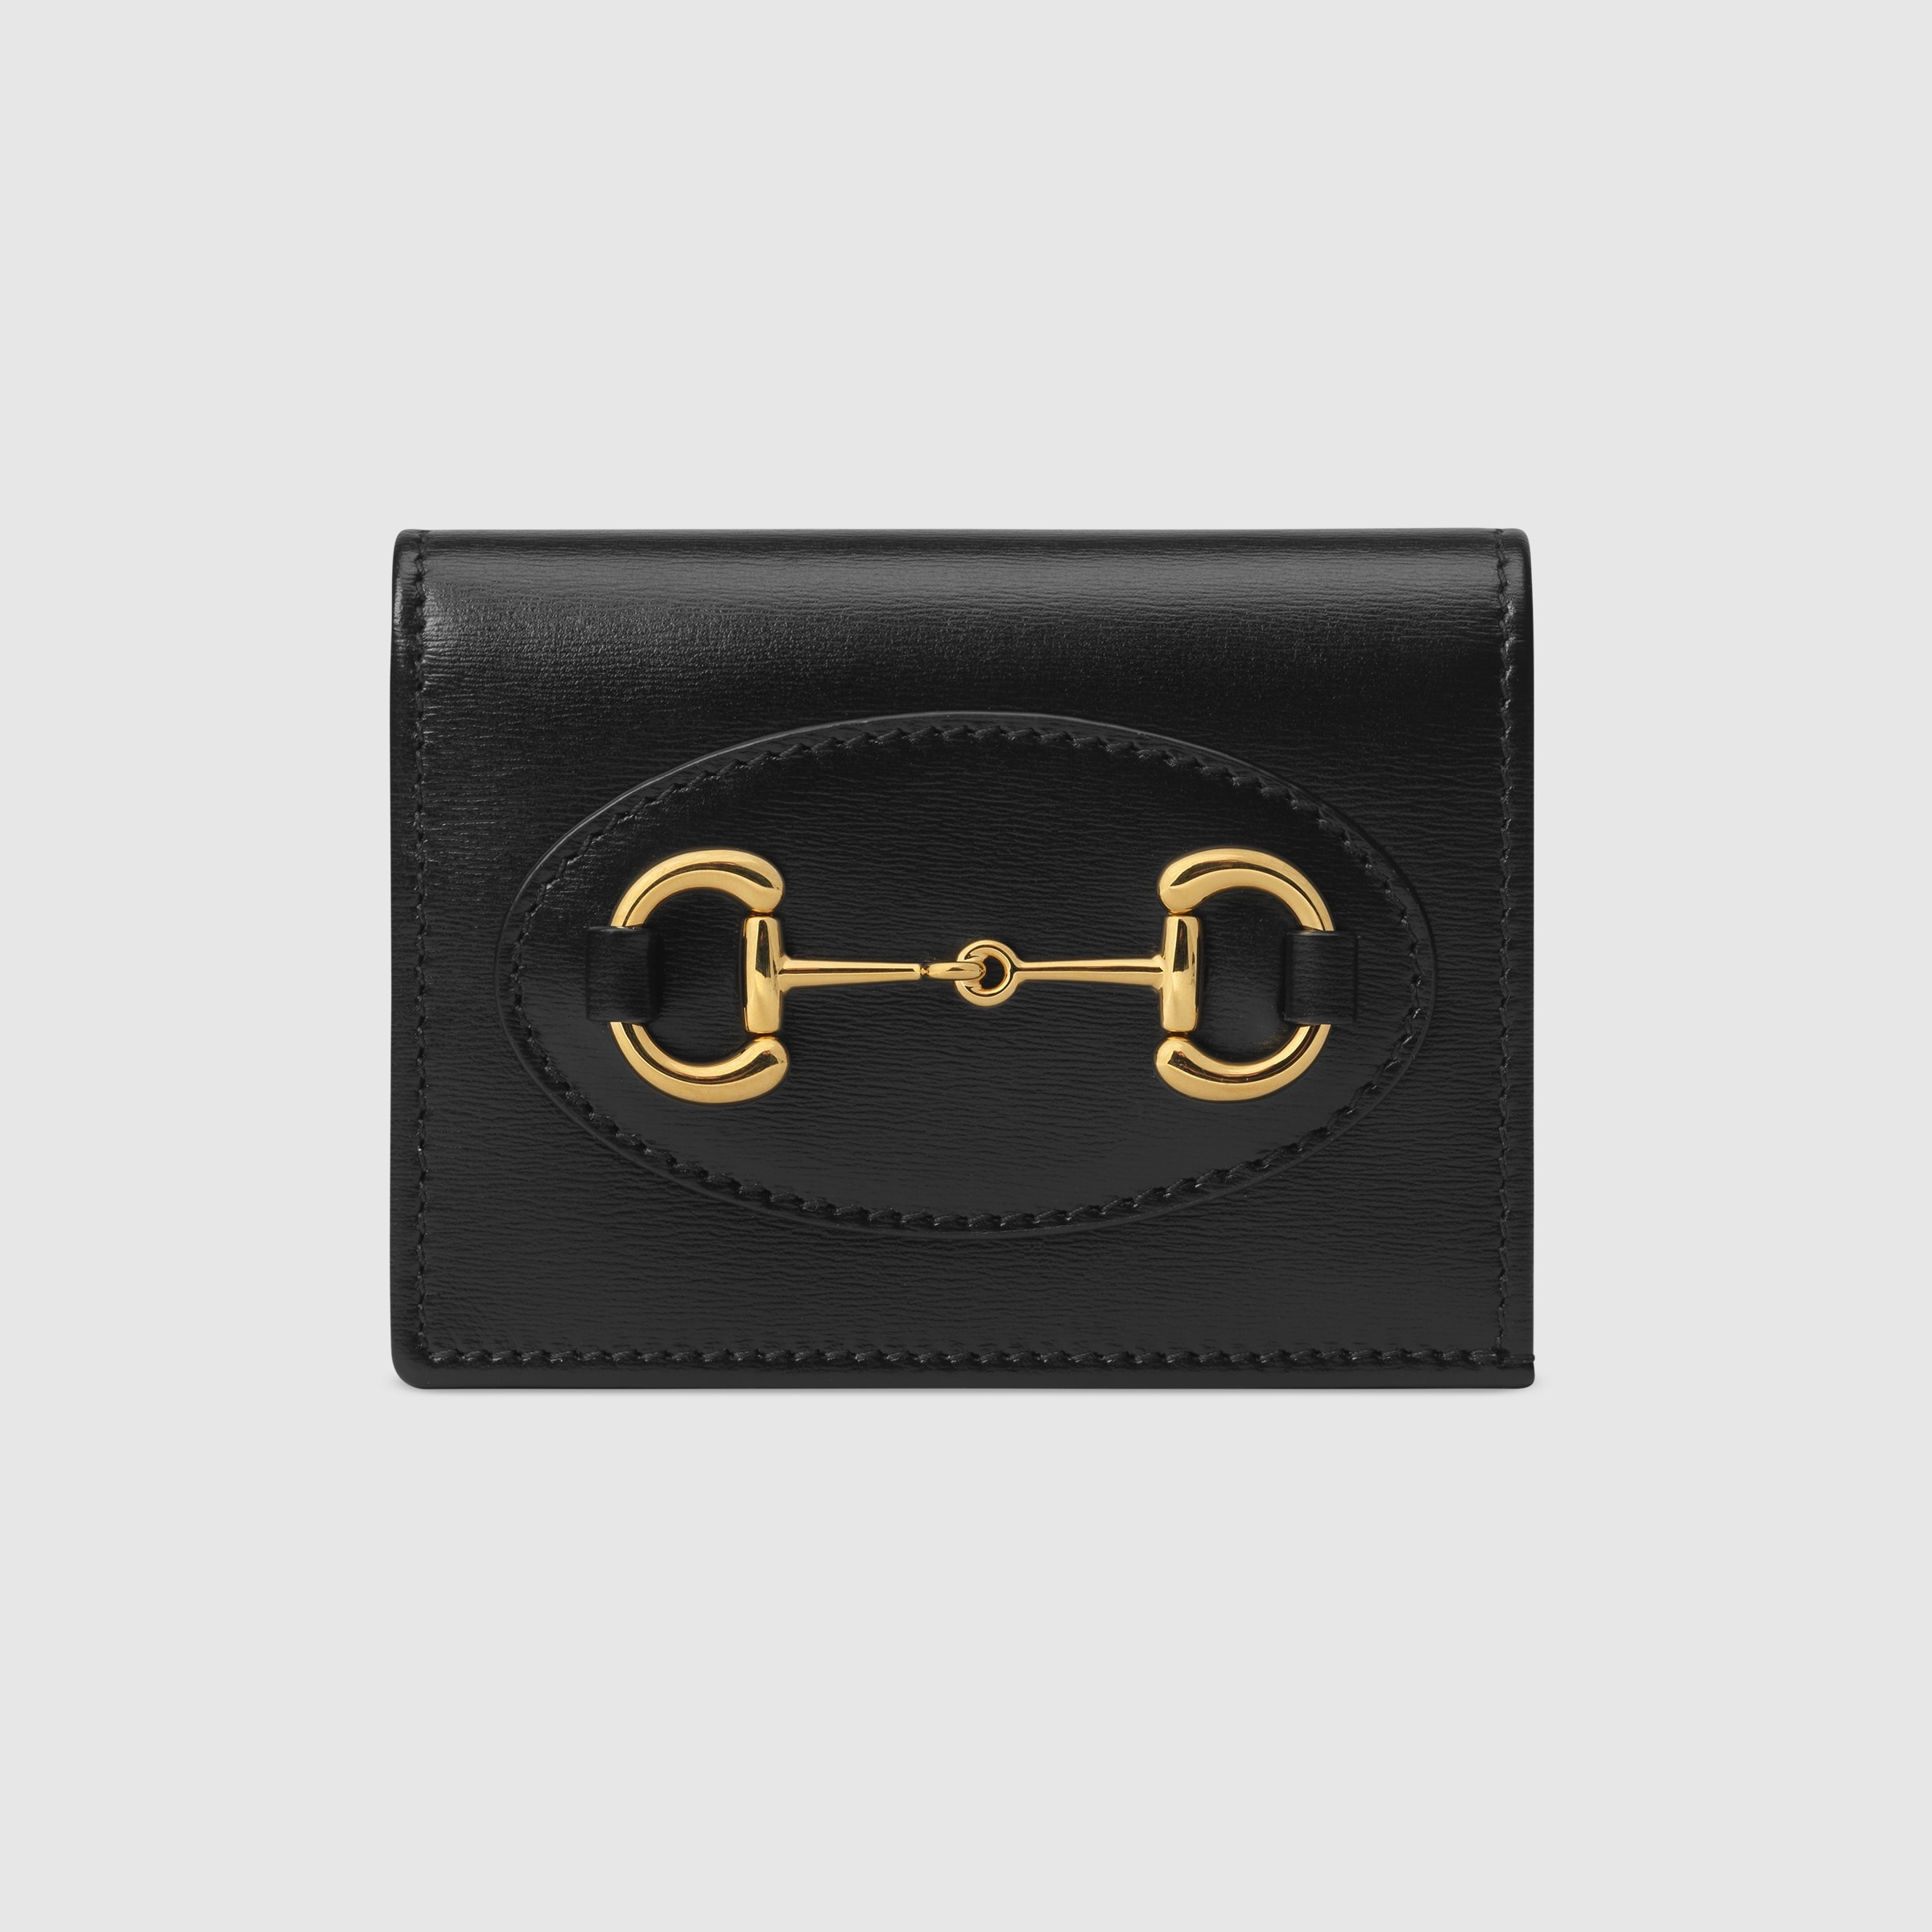 15 Best Louis Vuitton Wallets & Card Holders That Are Functional